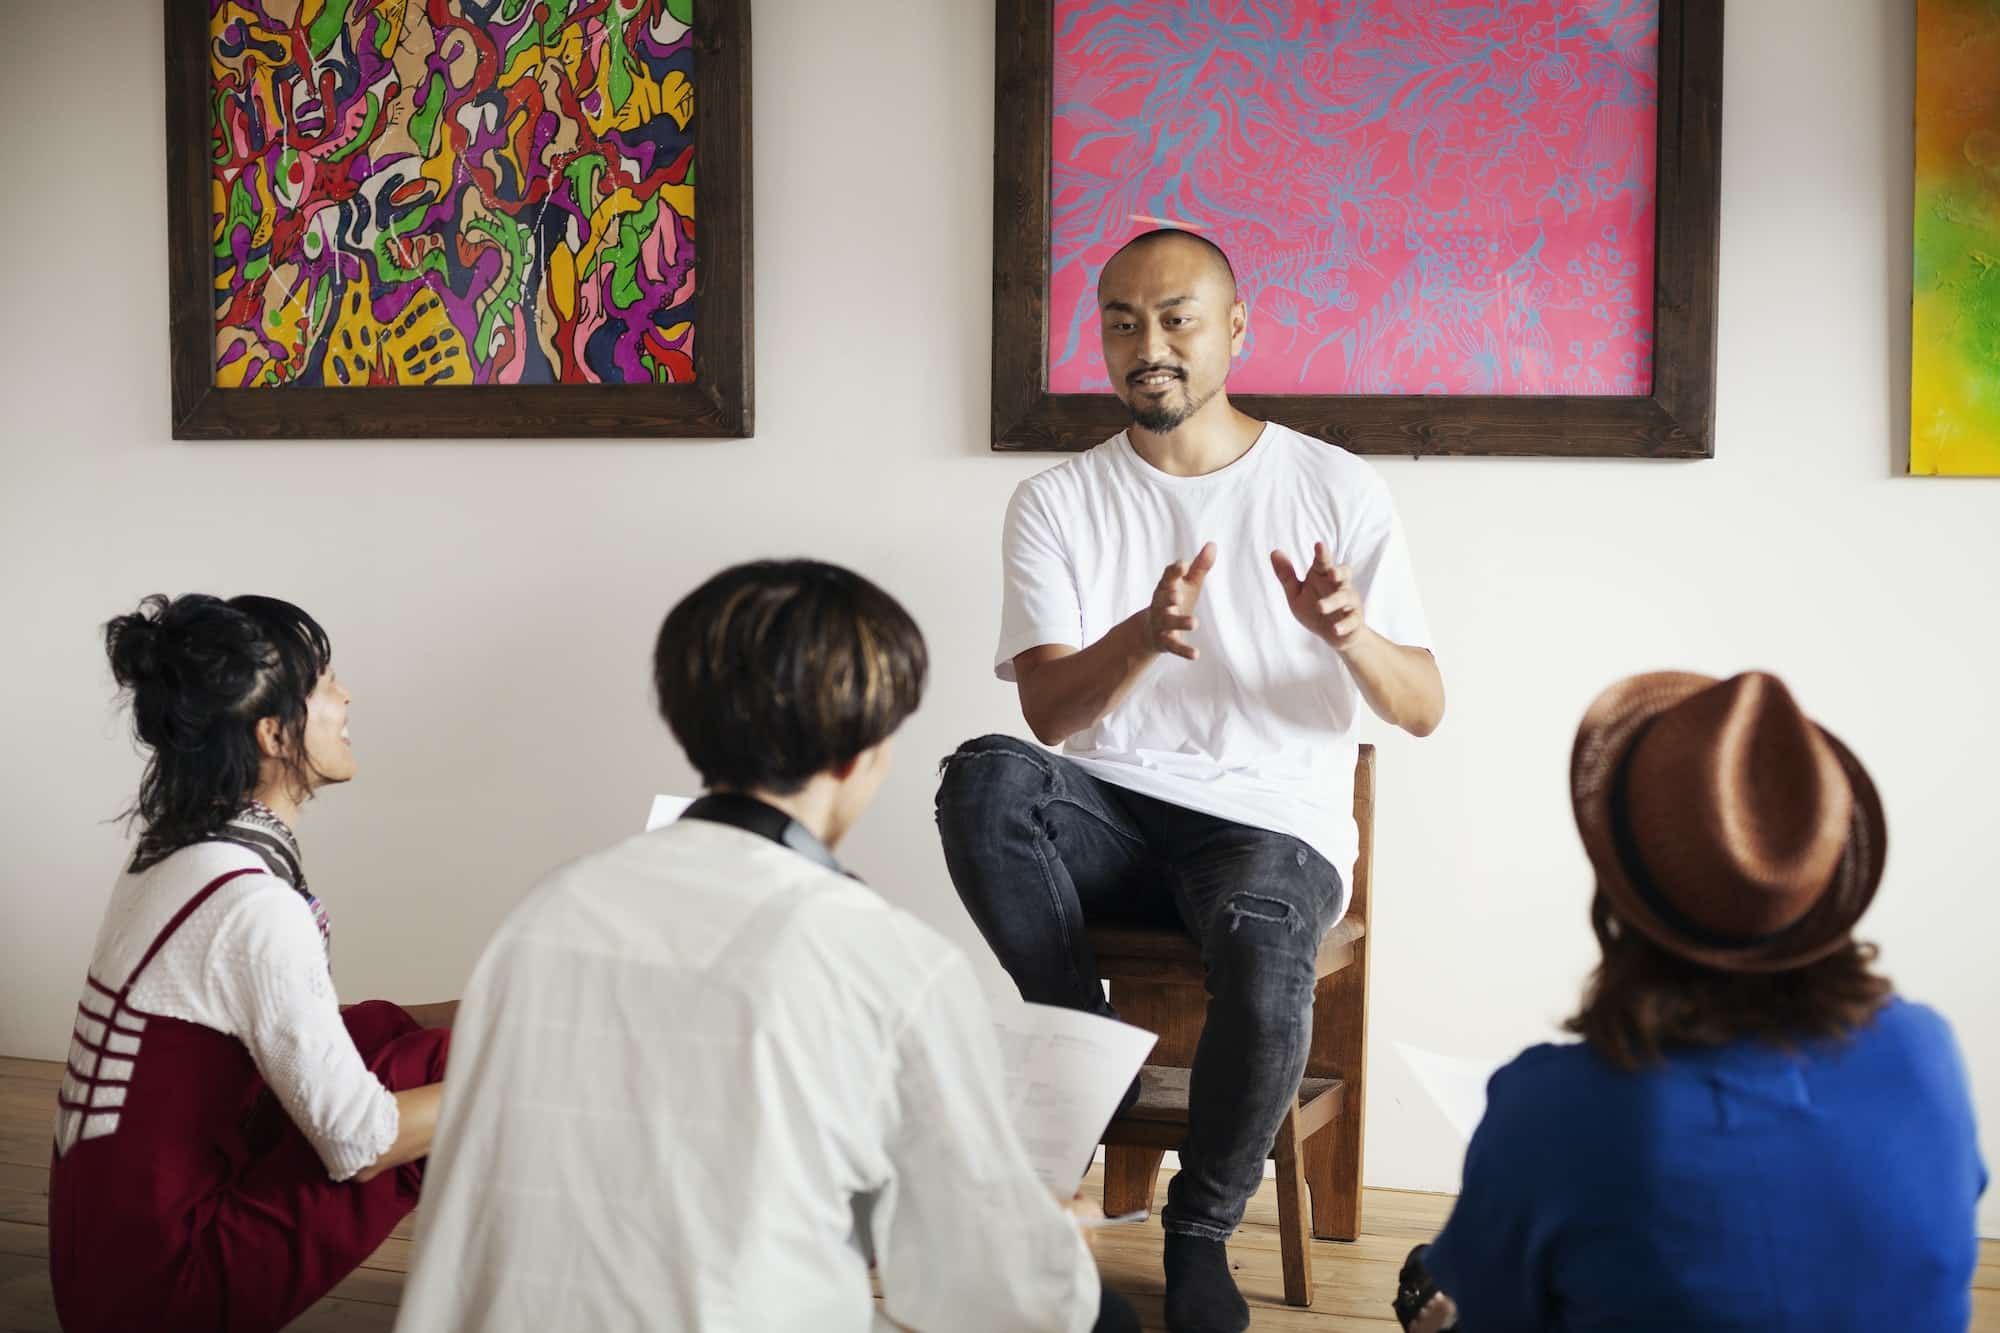 Group of Japanese men and women sitting in art gallery, holding a discussion.